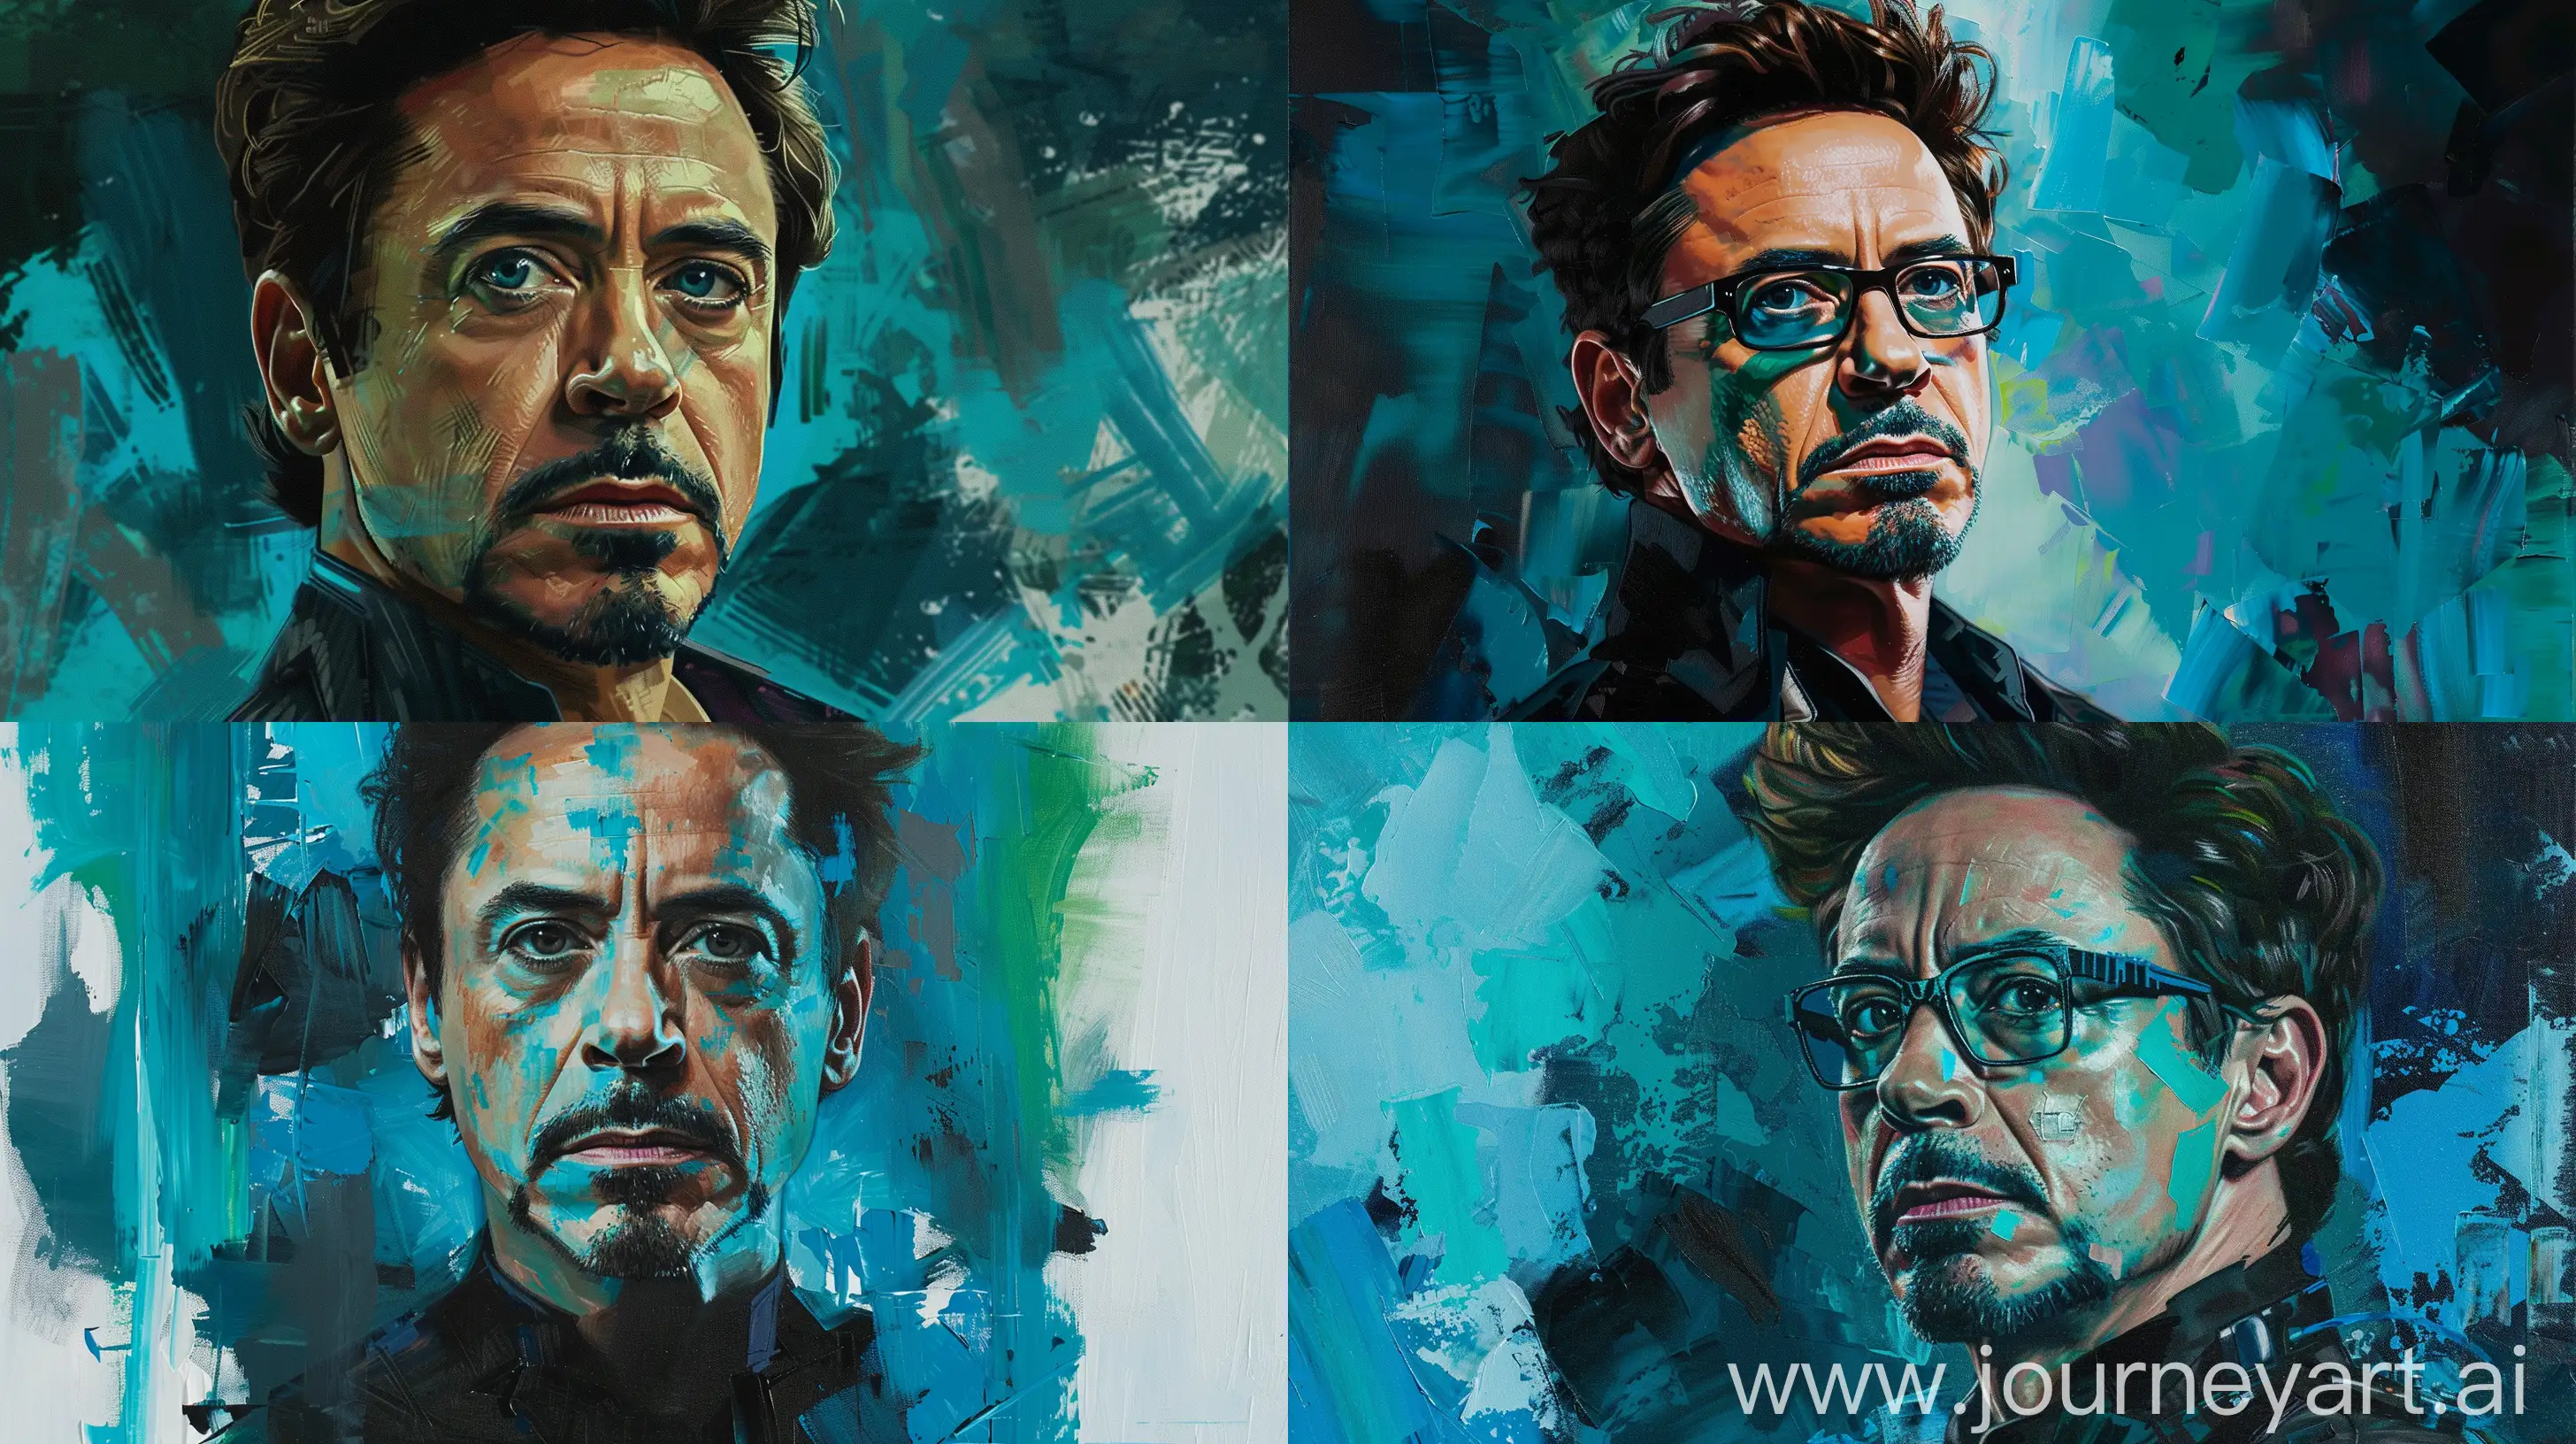 Robert-Downey-Jr-Portrayed-in-Star-Wars-Style-Oil-Painting